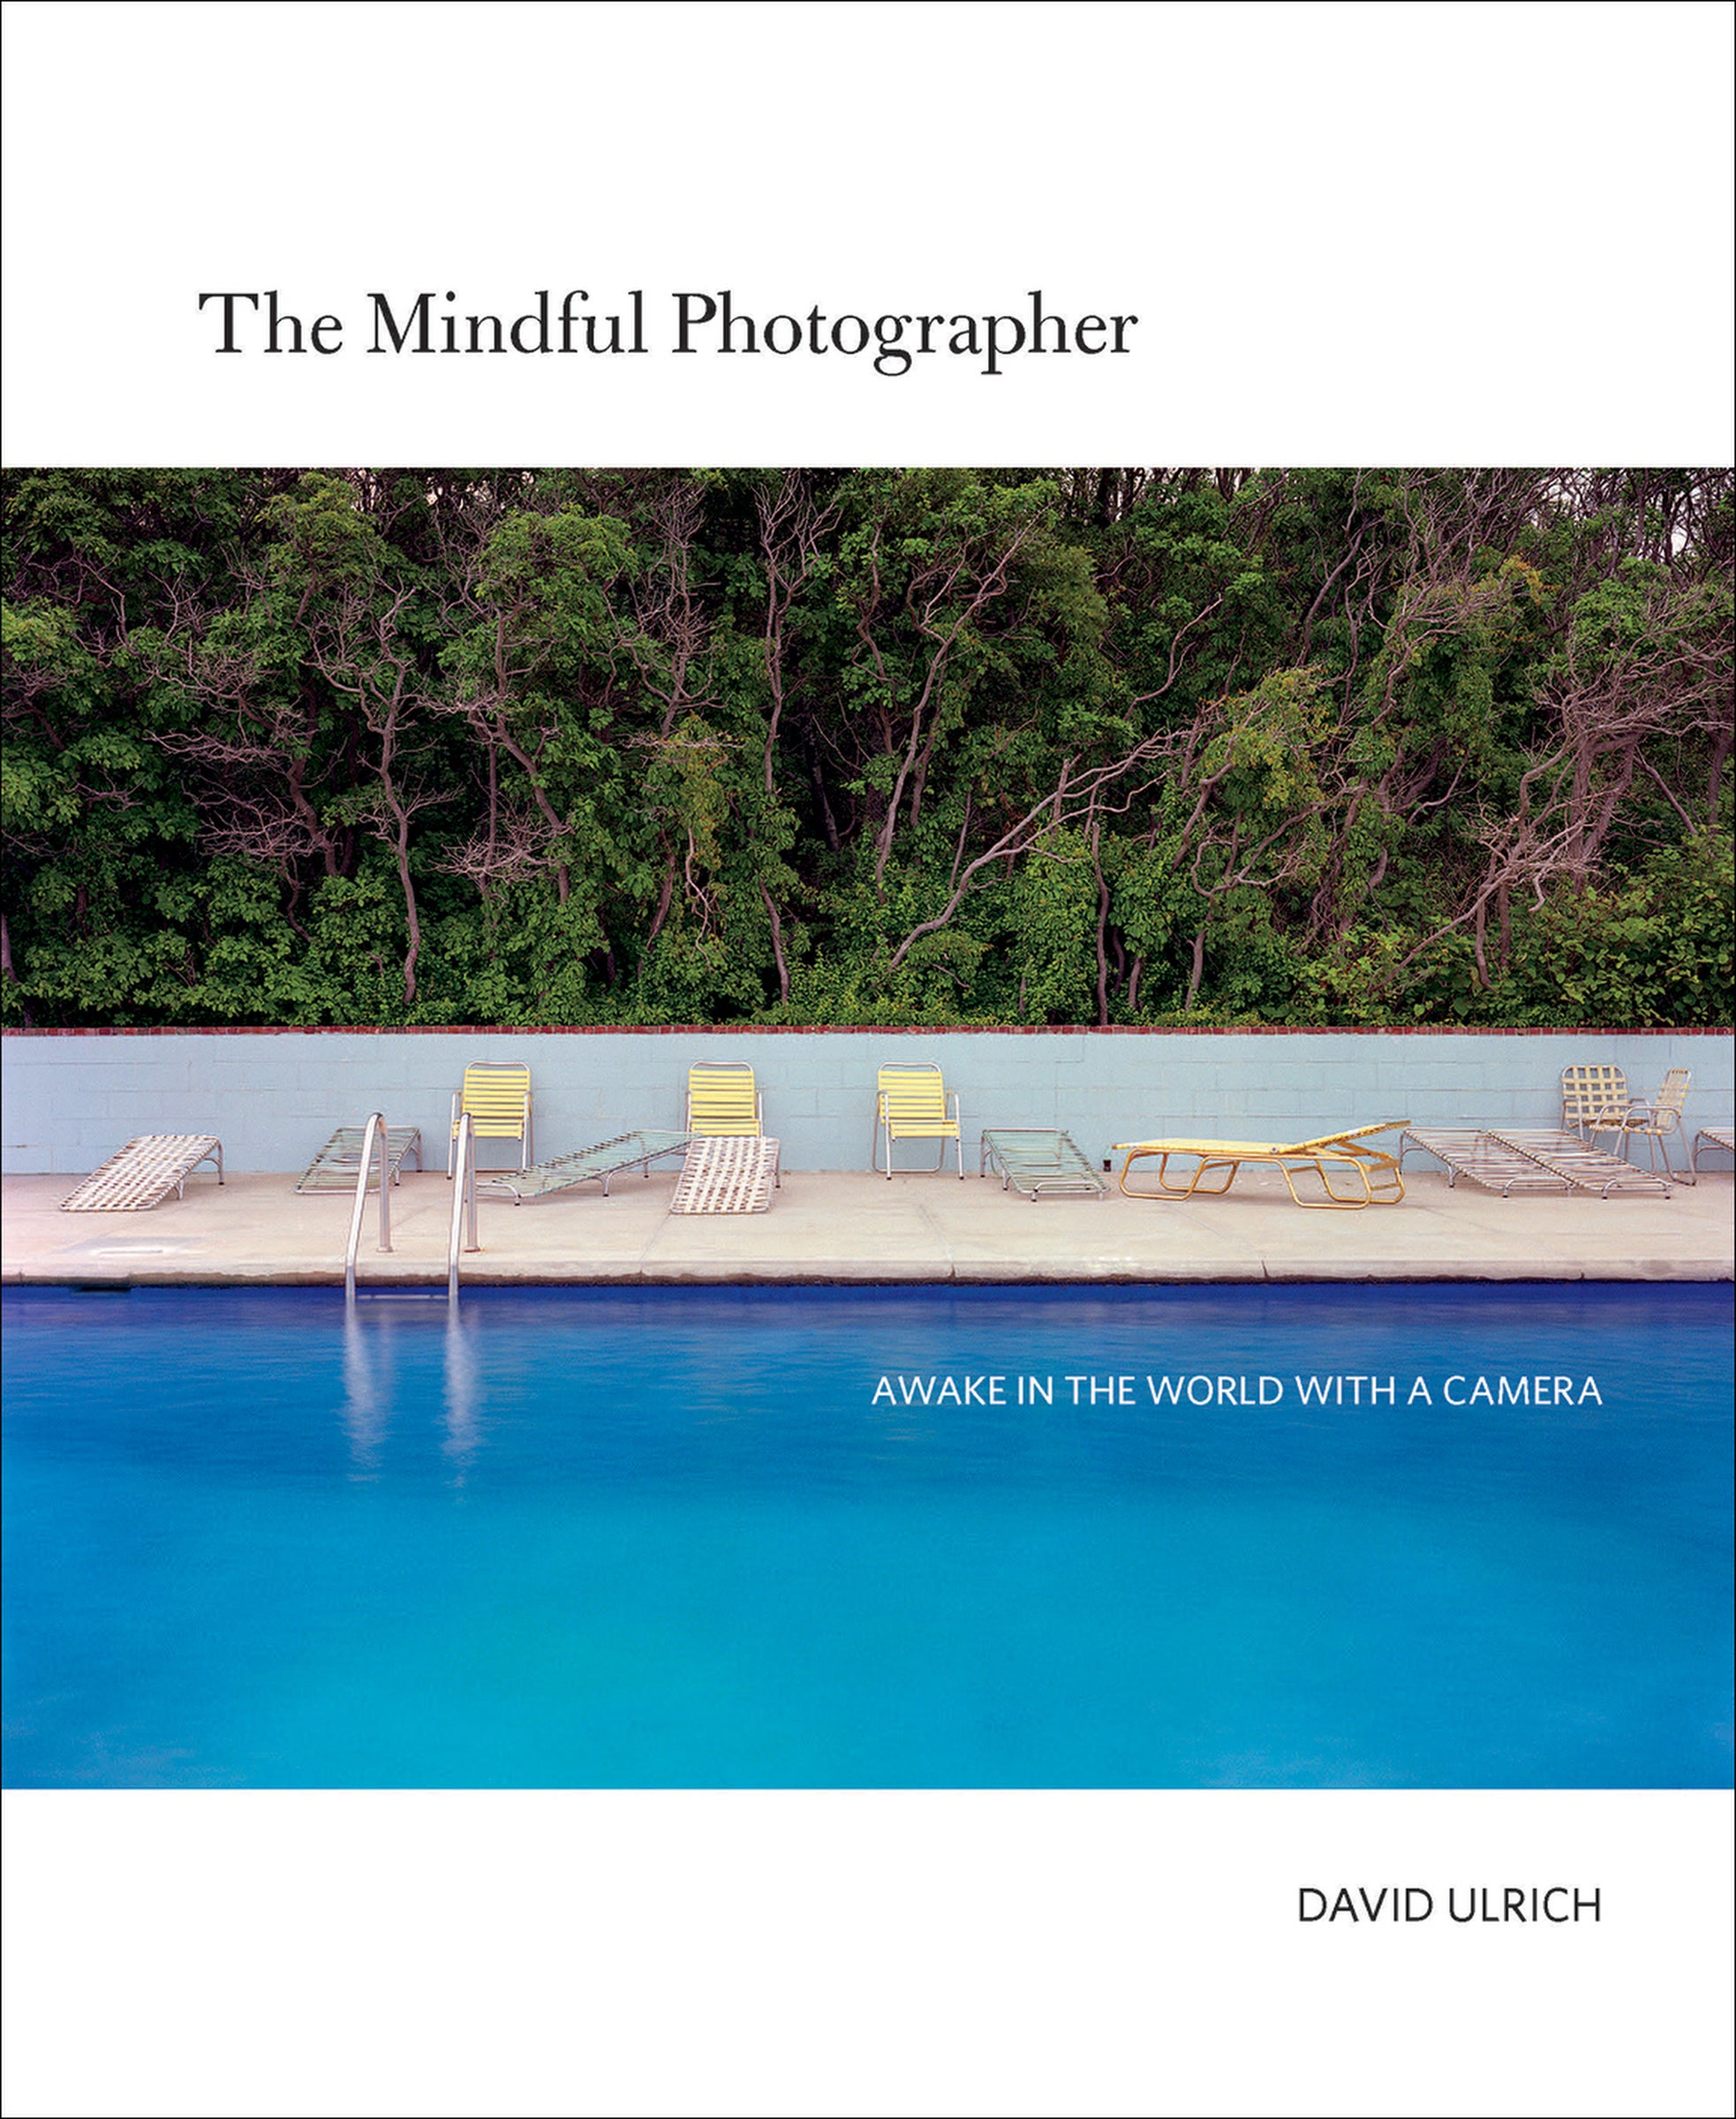 The "Mindful Photographer" cover